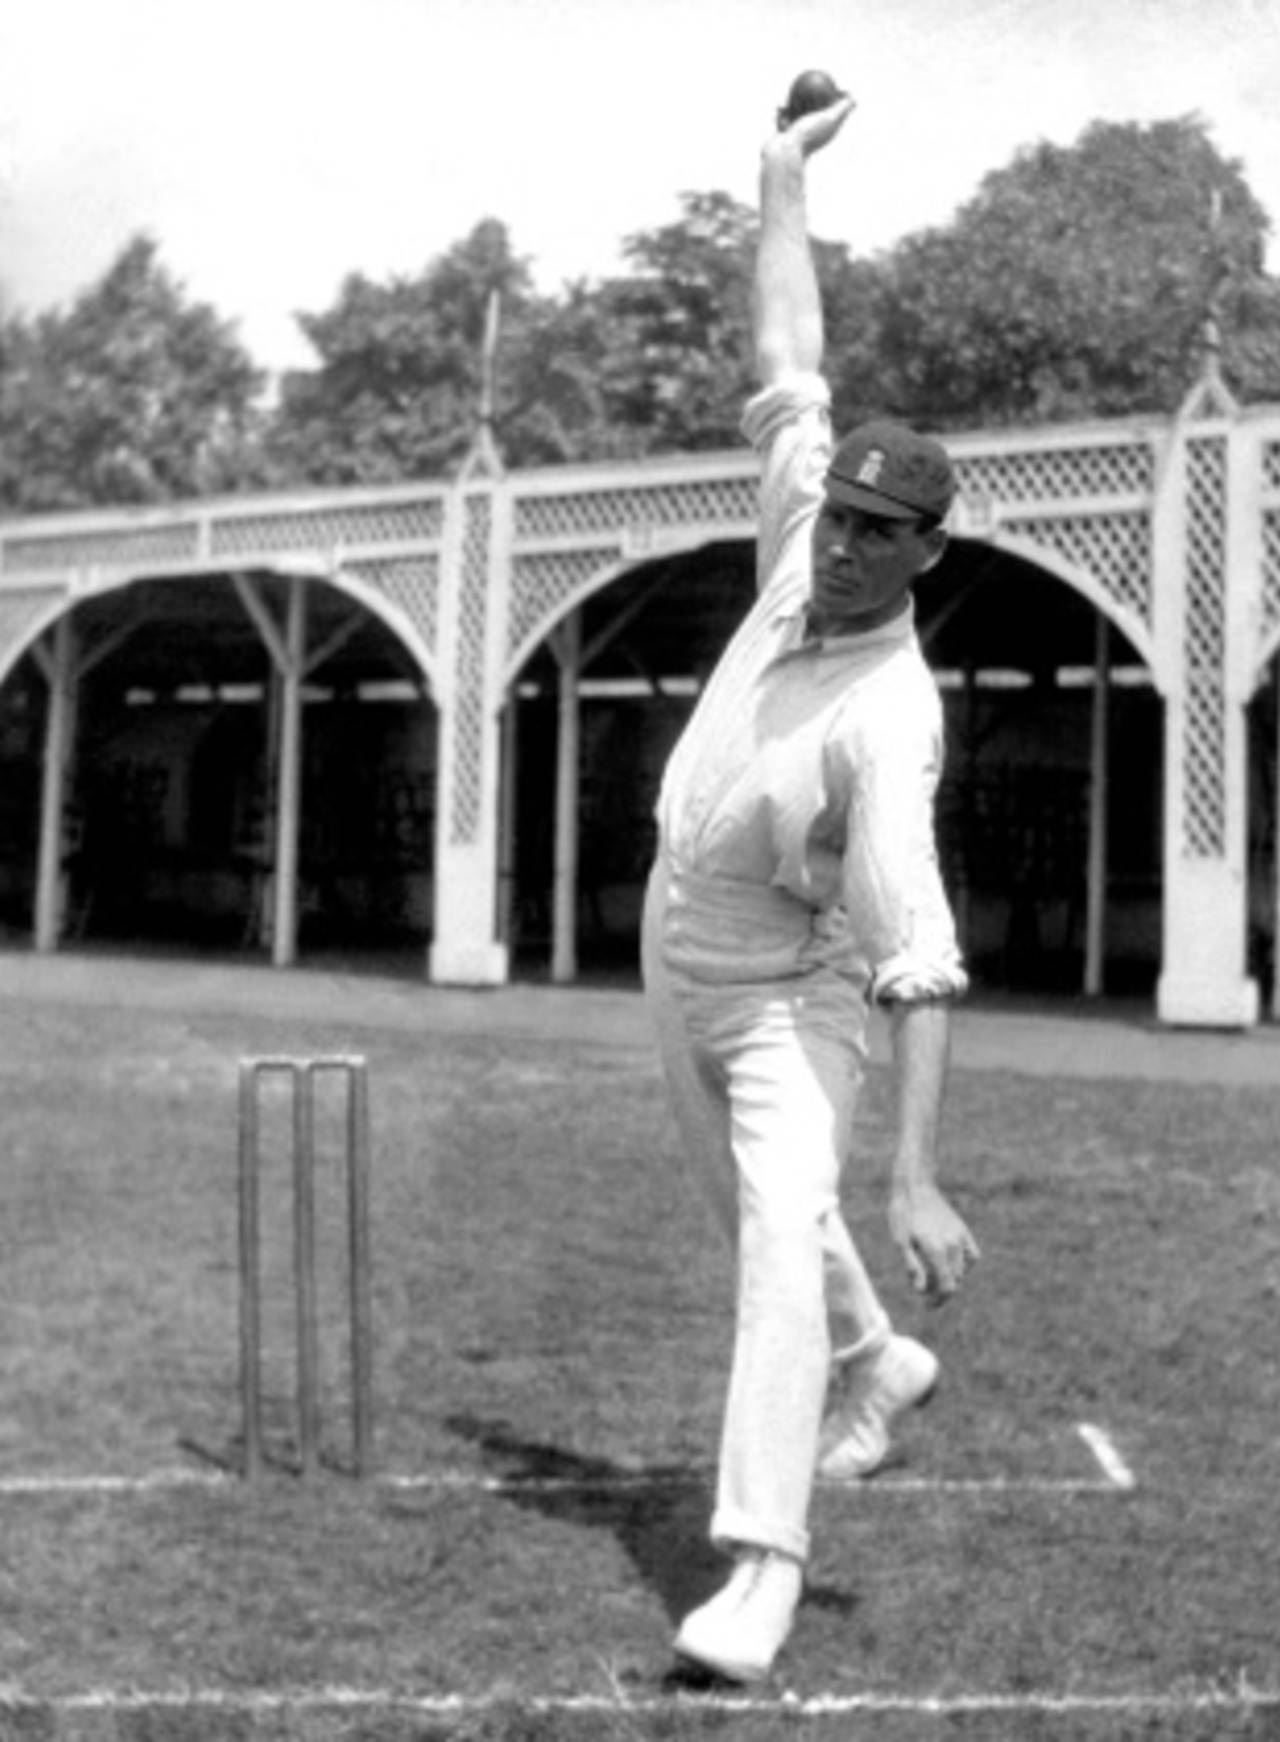 Sydney Barnes demonstrates his bowling action, Lord's, 1913